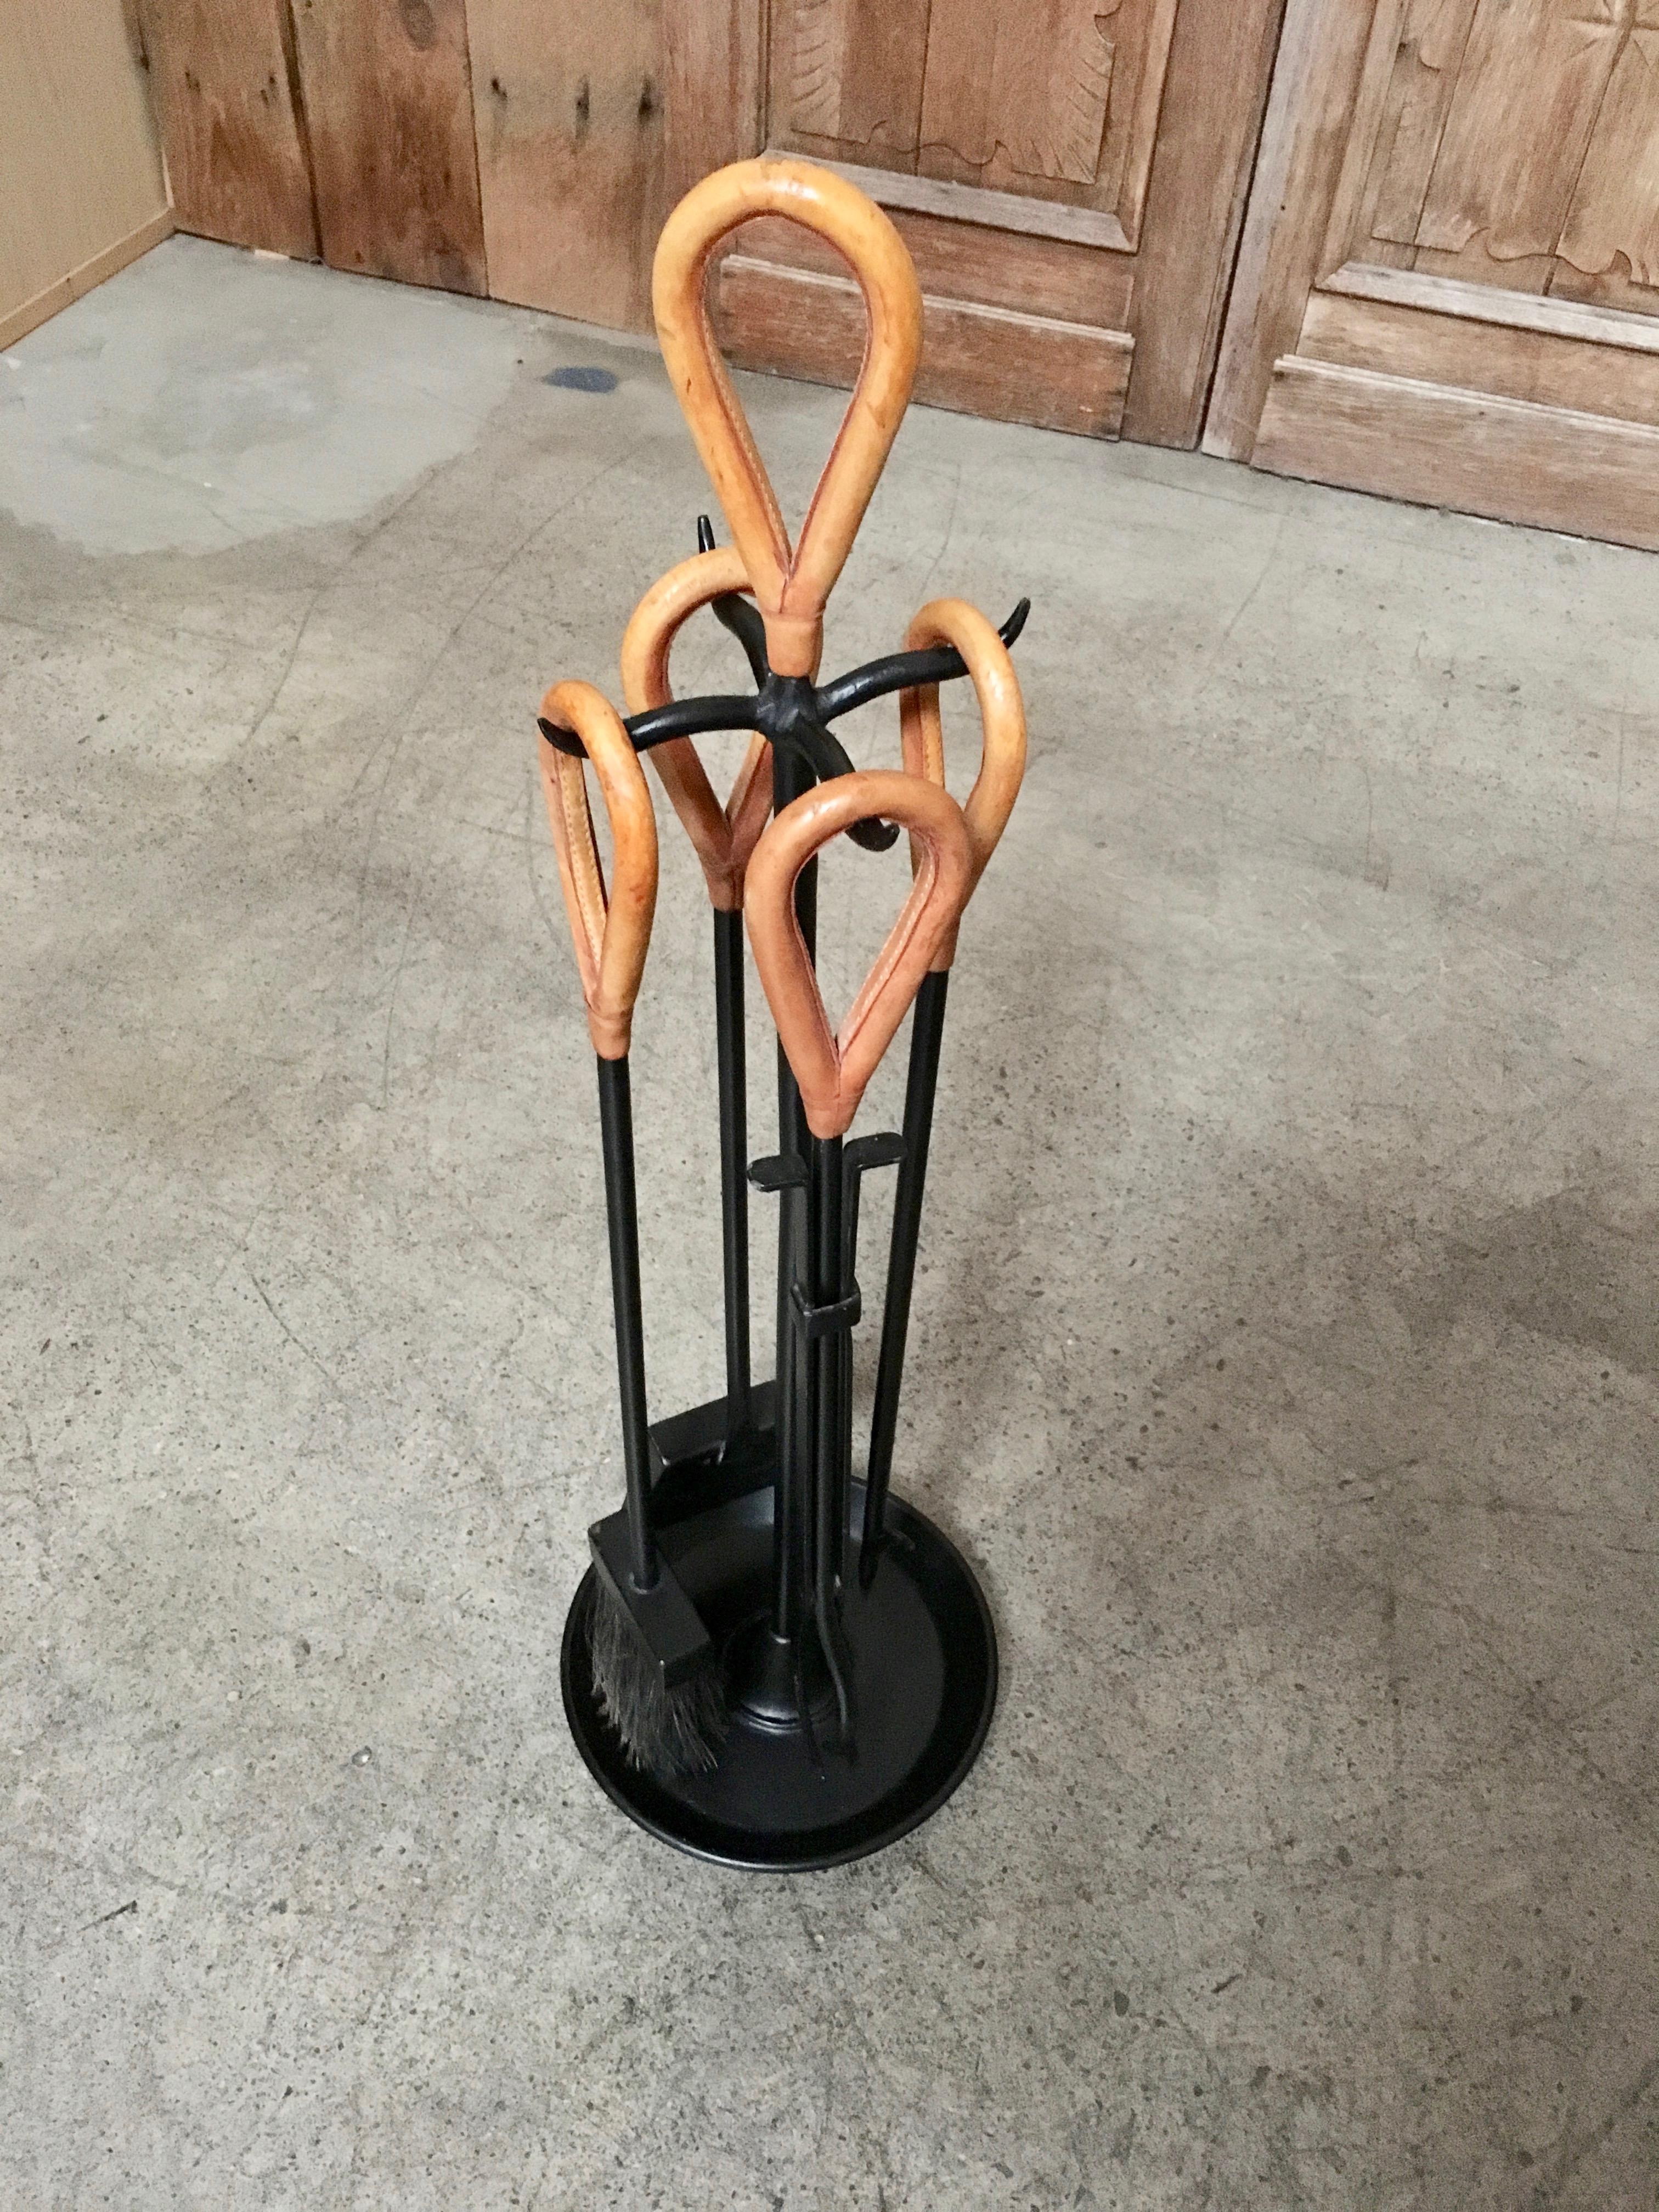 Fireplace set in the style of Jacques Adnet. Iron frame with saddle leather wrapped handles. This fire tool set includes a stand, long tongs, poker, brush and shovel.